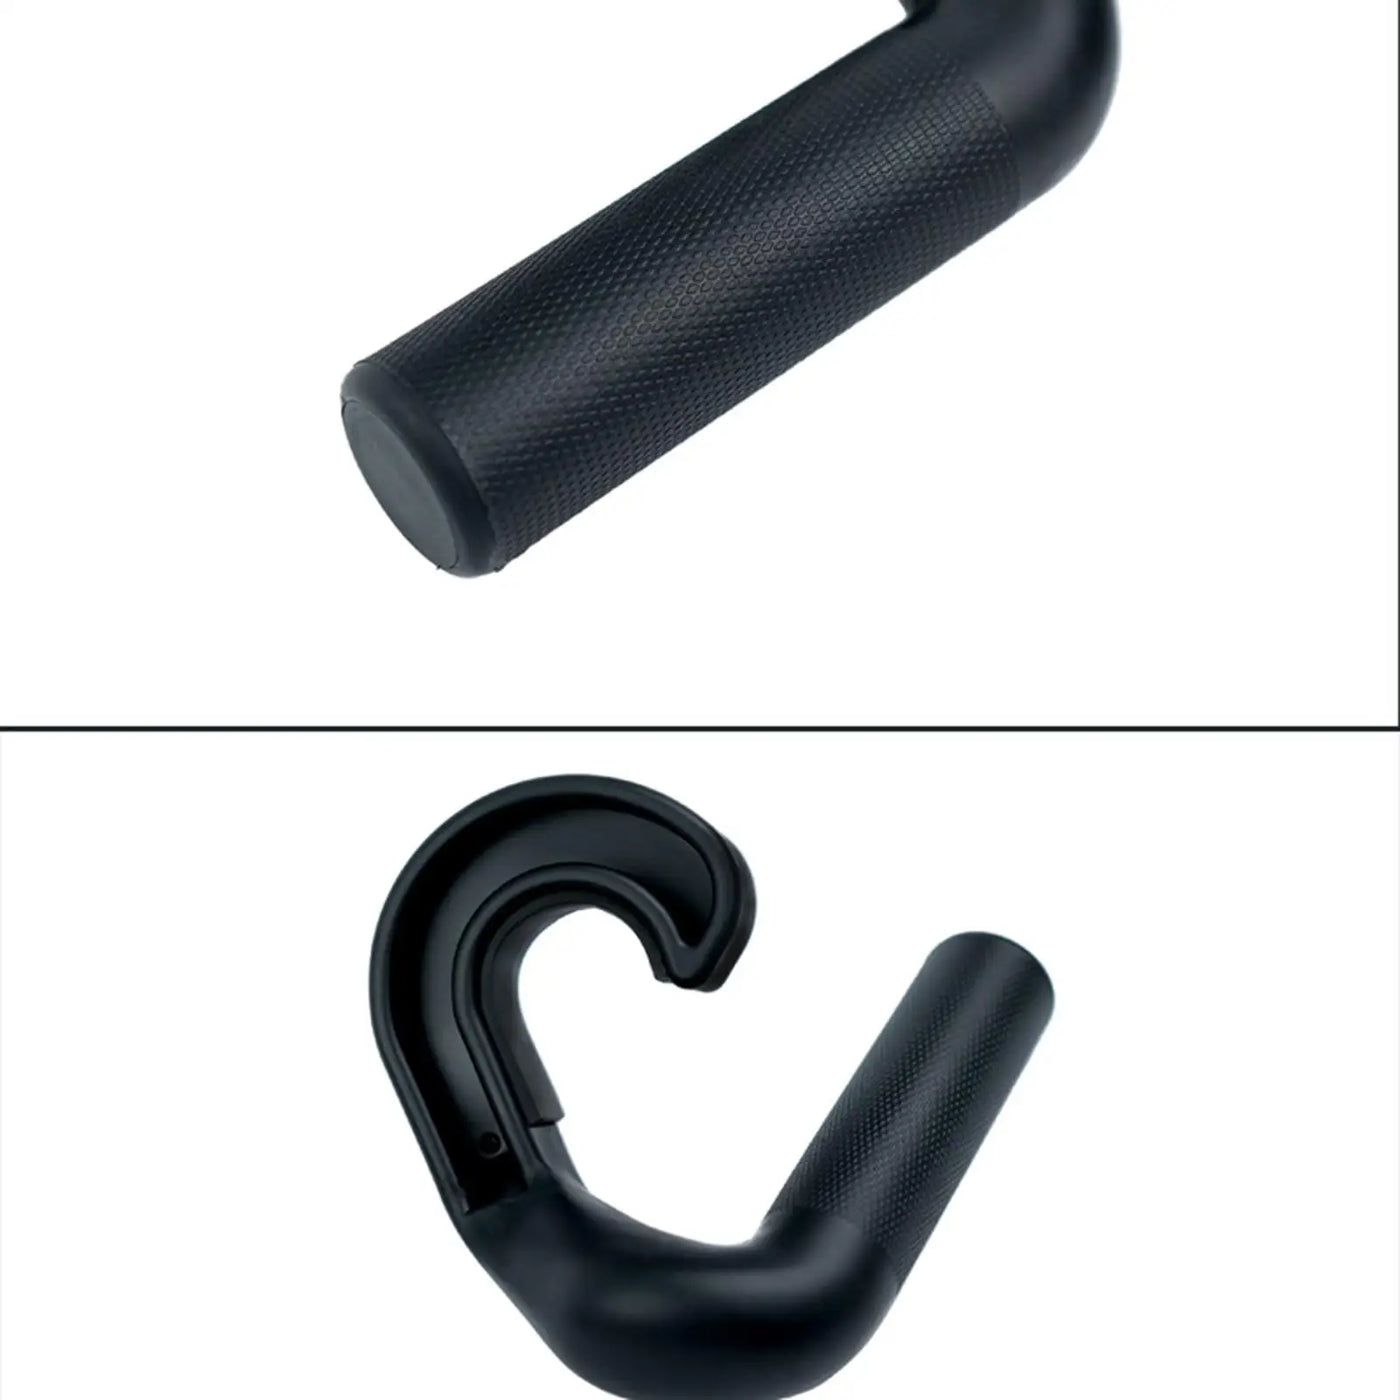 2 Pieces Pull up Bar Handles